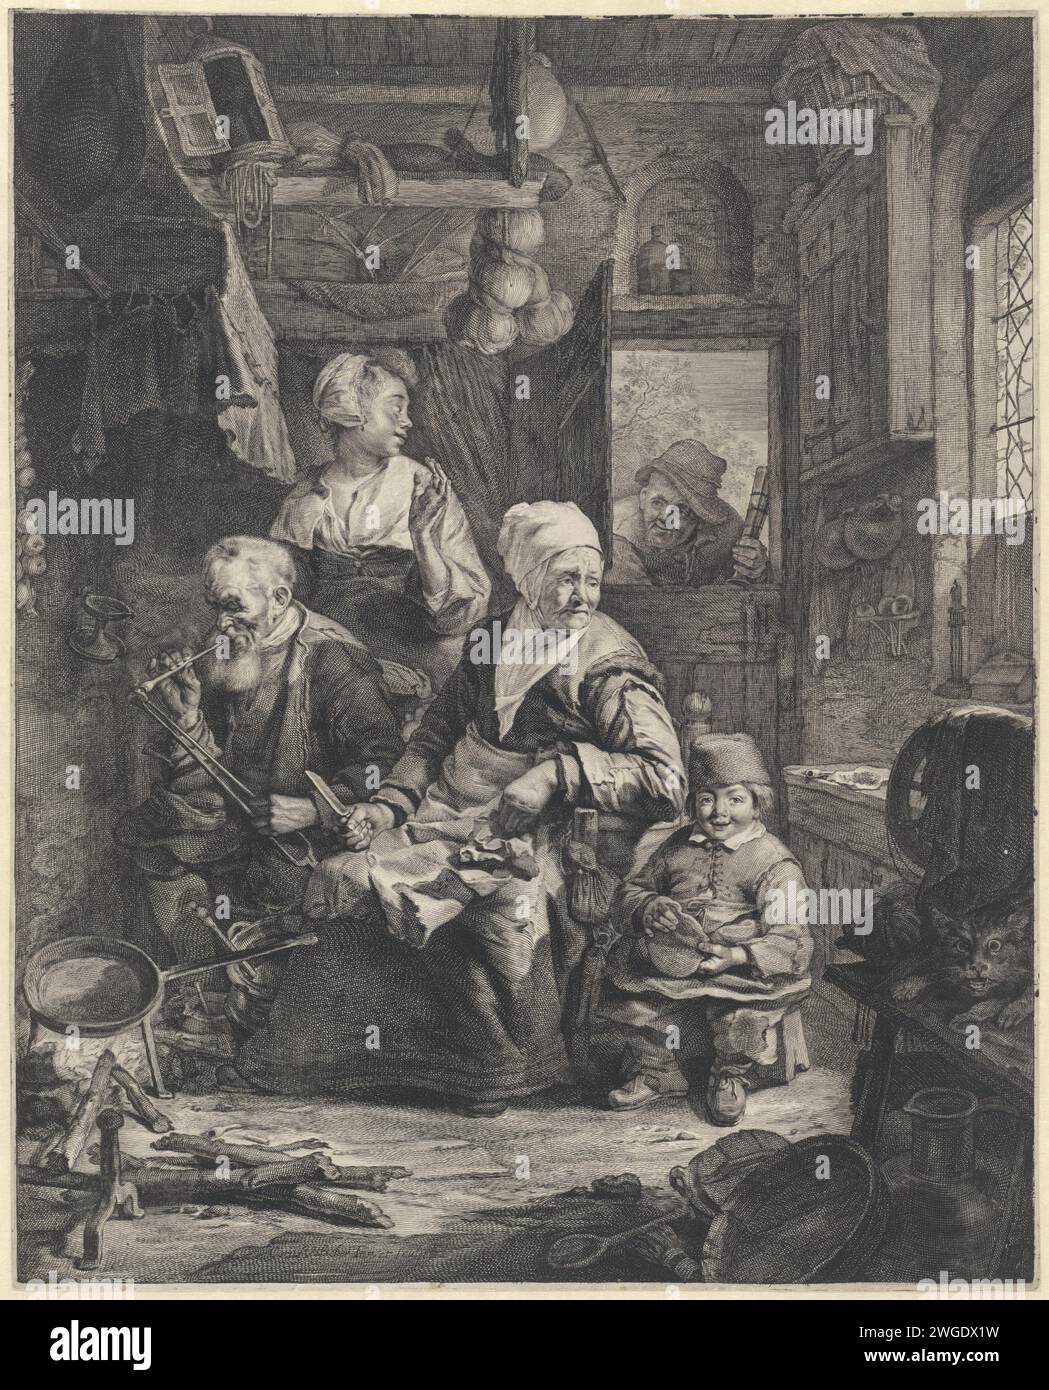 Pancake Bakster, Cornelis Visscher (II), 1638 - 1658 print In a kitchen an old woman is baking pancakes for a fire. The frying pan is on the fire. Next to her a man with a pipe and a child with a pancake. Behind the smoking man a young woman and a small child. In the doorway is an old man with a glass. On the right a cat. Haarlem paper engraving / etching pancakes. kitchen-interior. cat. pipe  tobacco Stock Photo